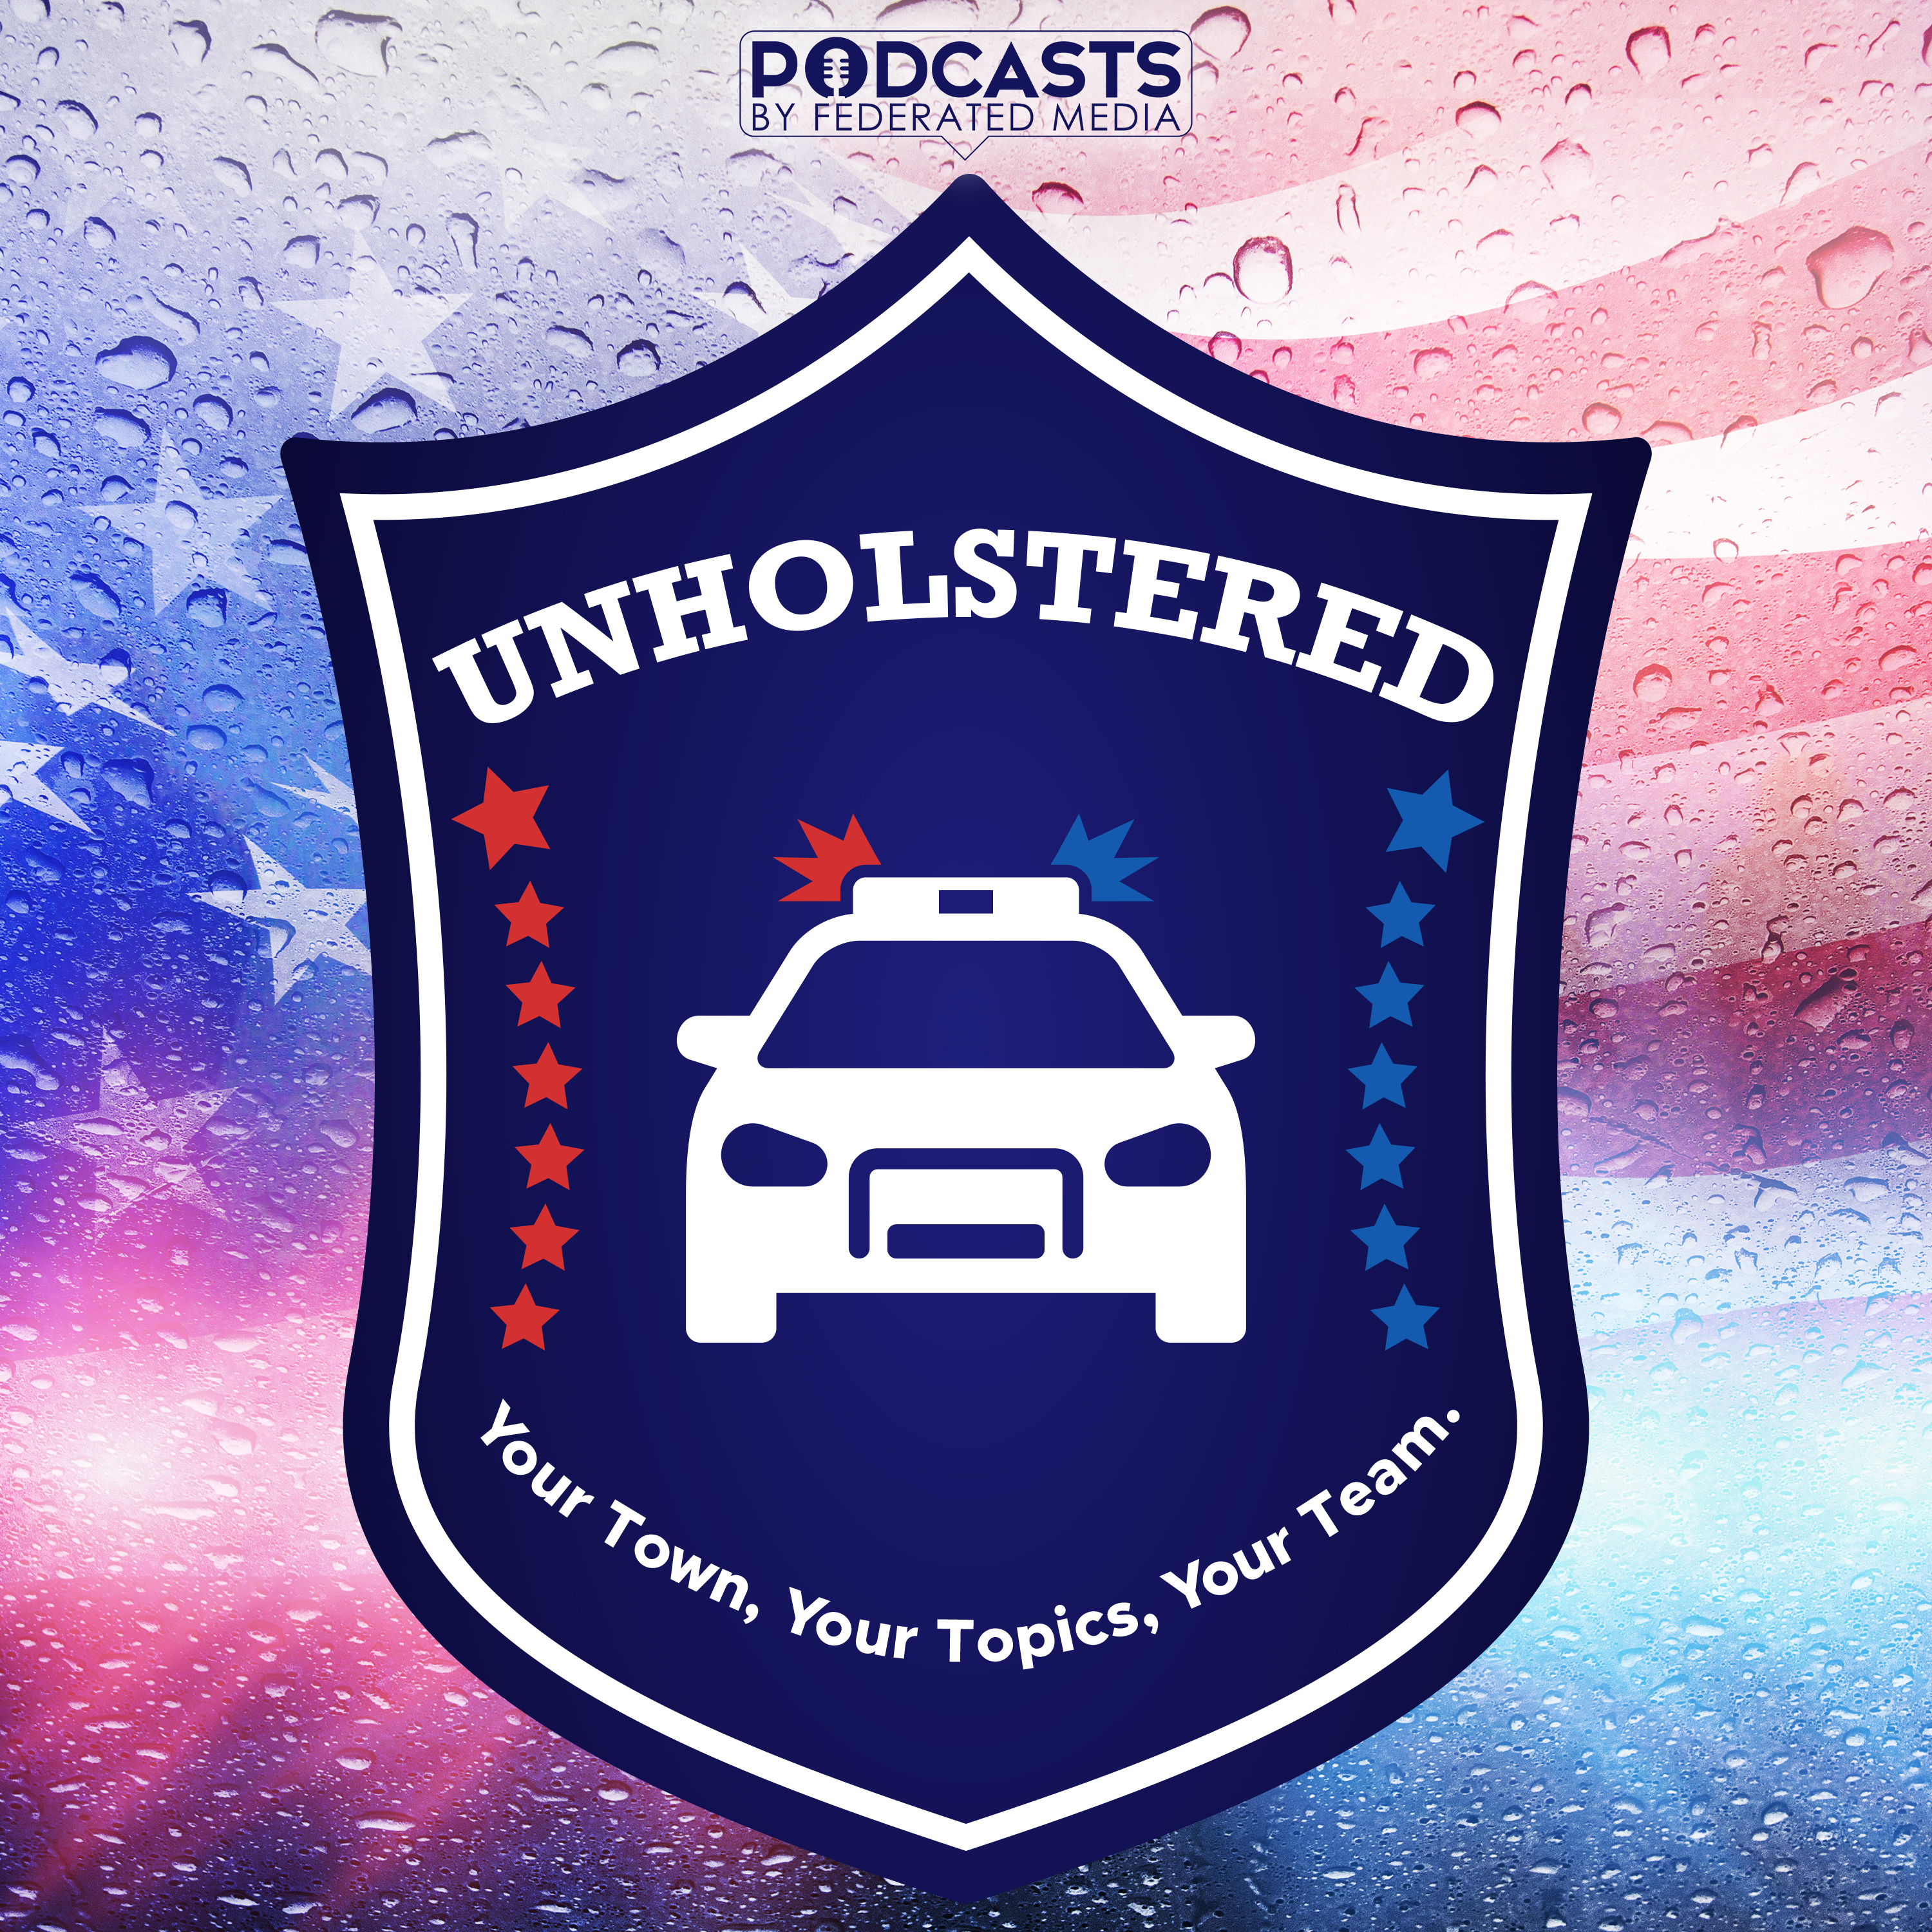 102: Impaired Driving During the Holidays